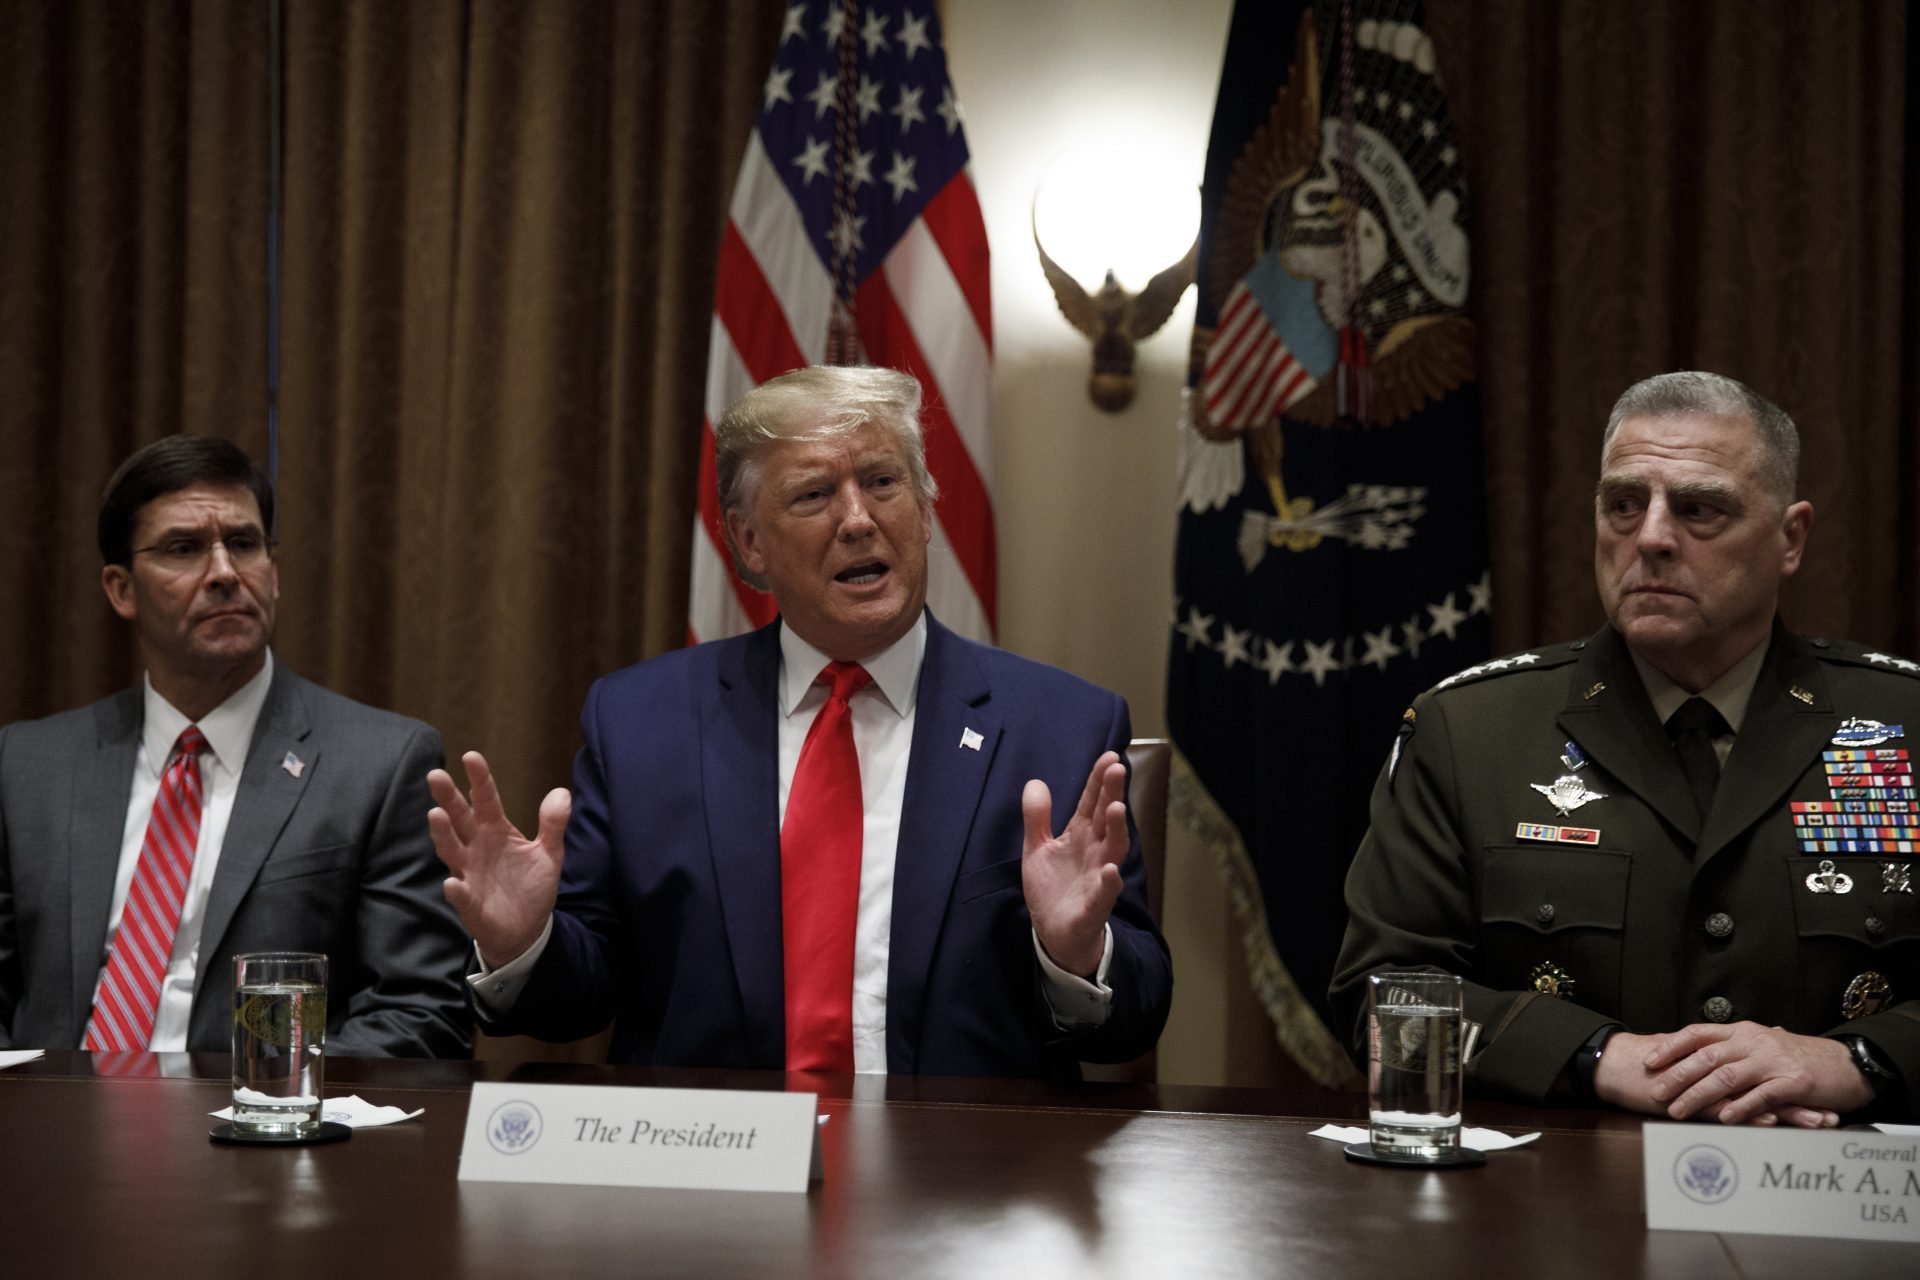 President Donald Trump, joined by from left, Defense Secretary Mark Esper, and Chairman of the Joint Chiefs of Staff Gen. Mark Milley, speaks to media during a briefing with senior military leaders in the Cabinet Room at the White House in Washington, Monday, Oct. 7, 2019.